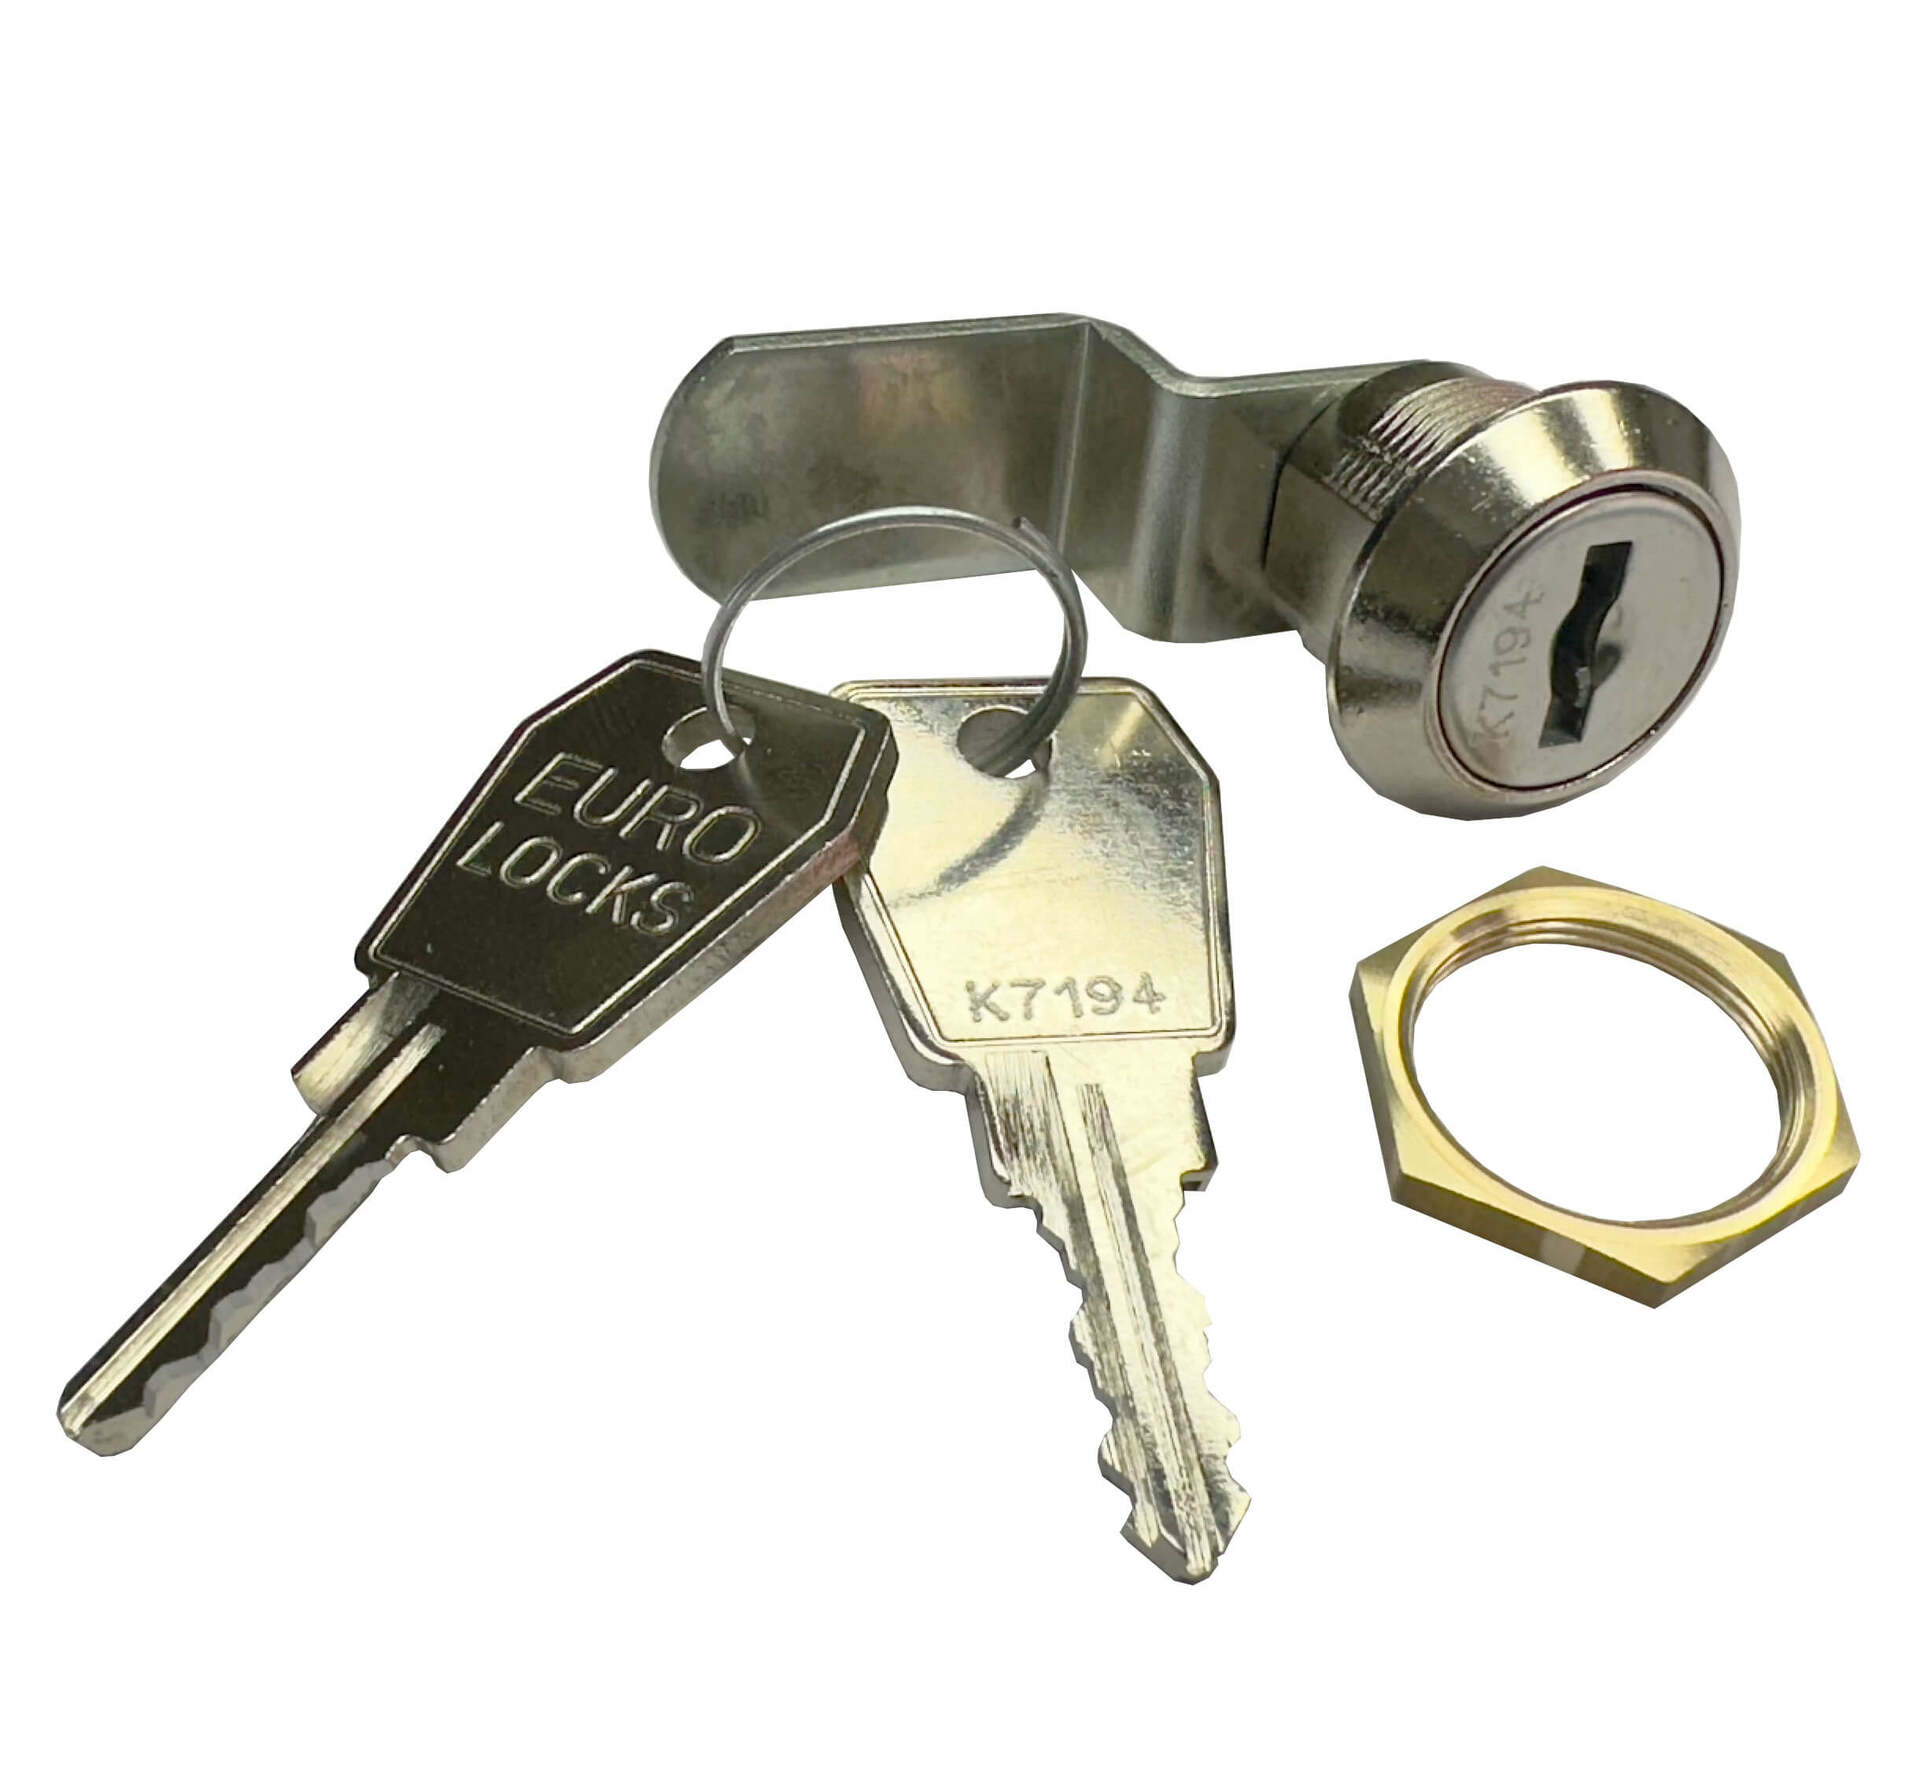 Cylinder lock with 2 numbered keys